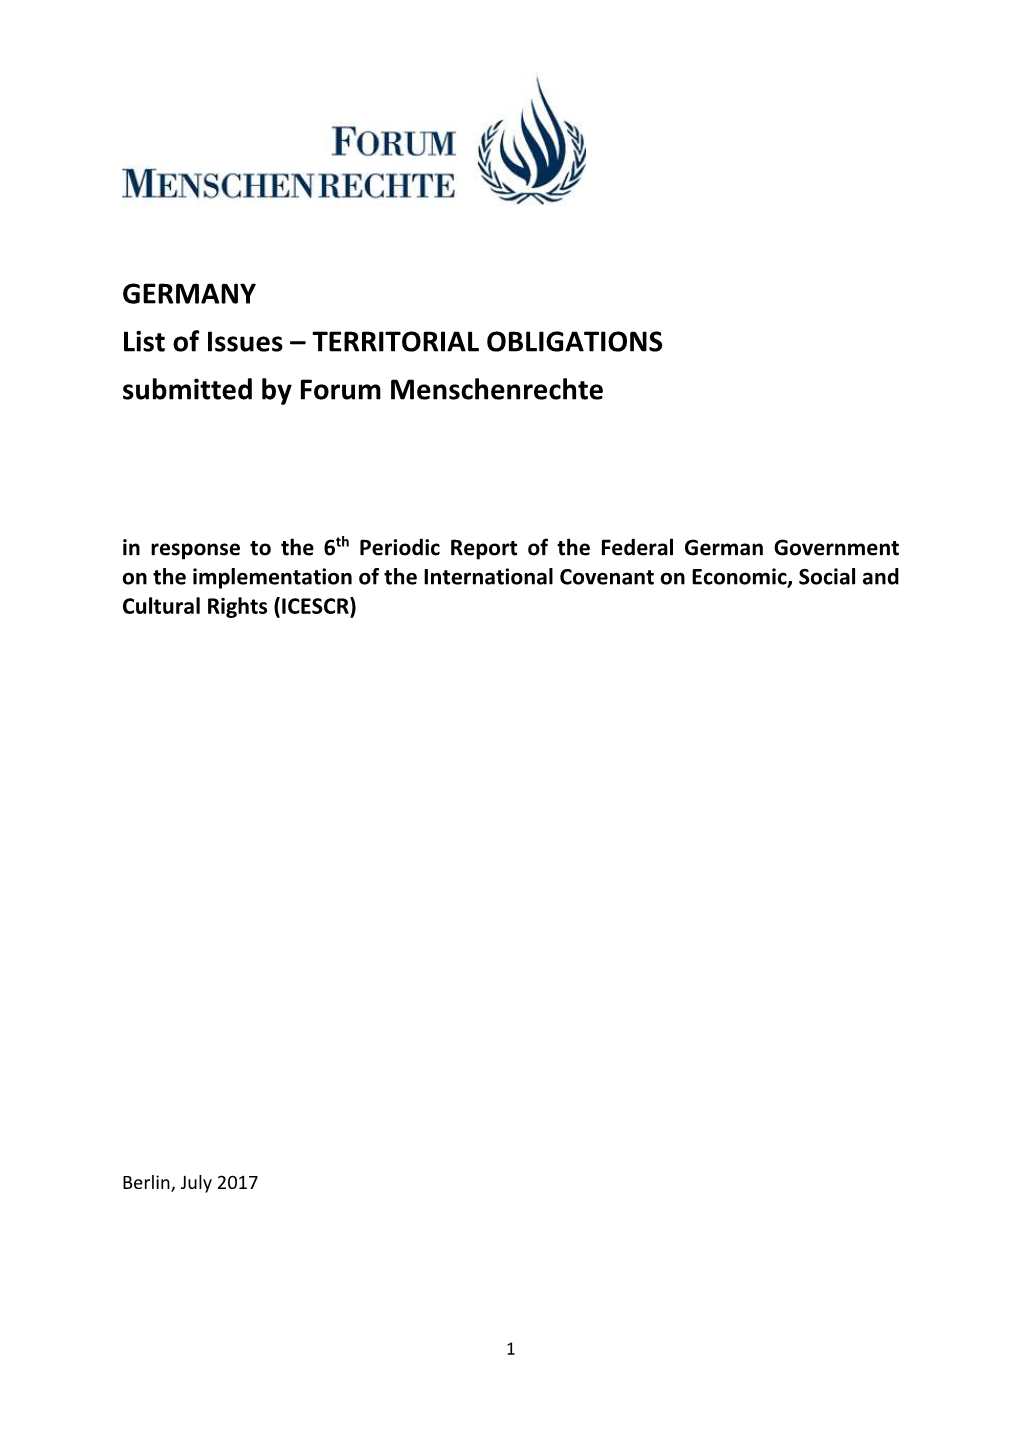 GERMANY List of Issues – TERRITORIAL OBLIGATIONS Submitted by Forum Menschenrechte